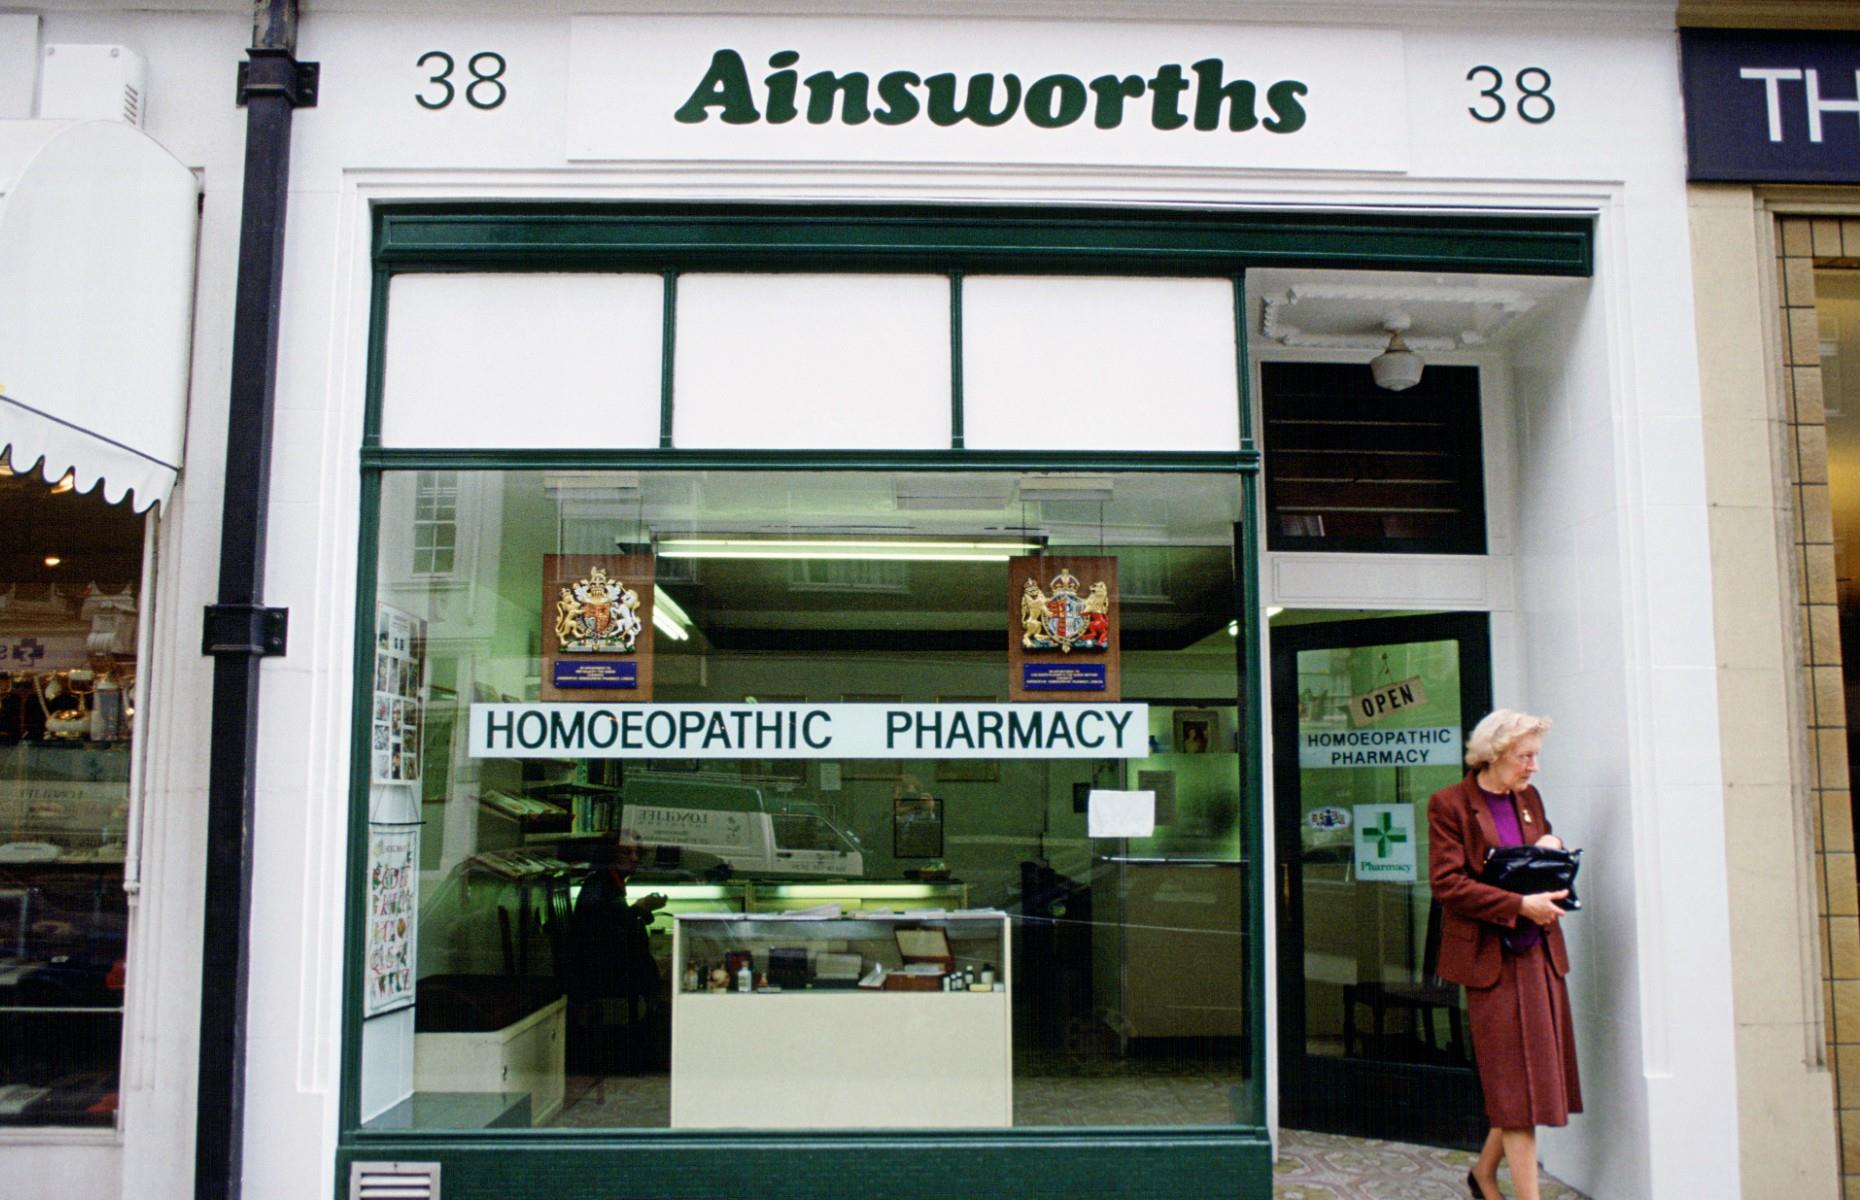 Ainsworths Homeopathic Pharmacy